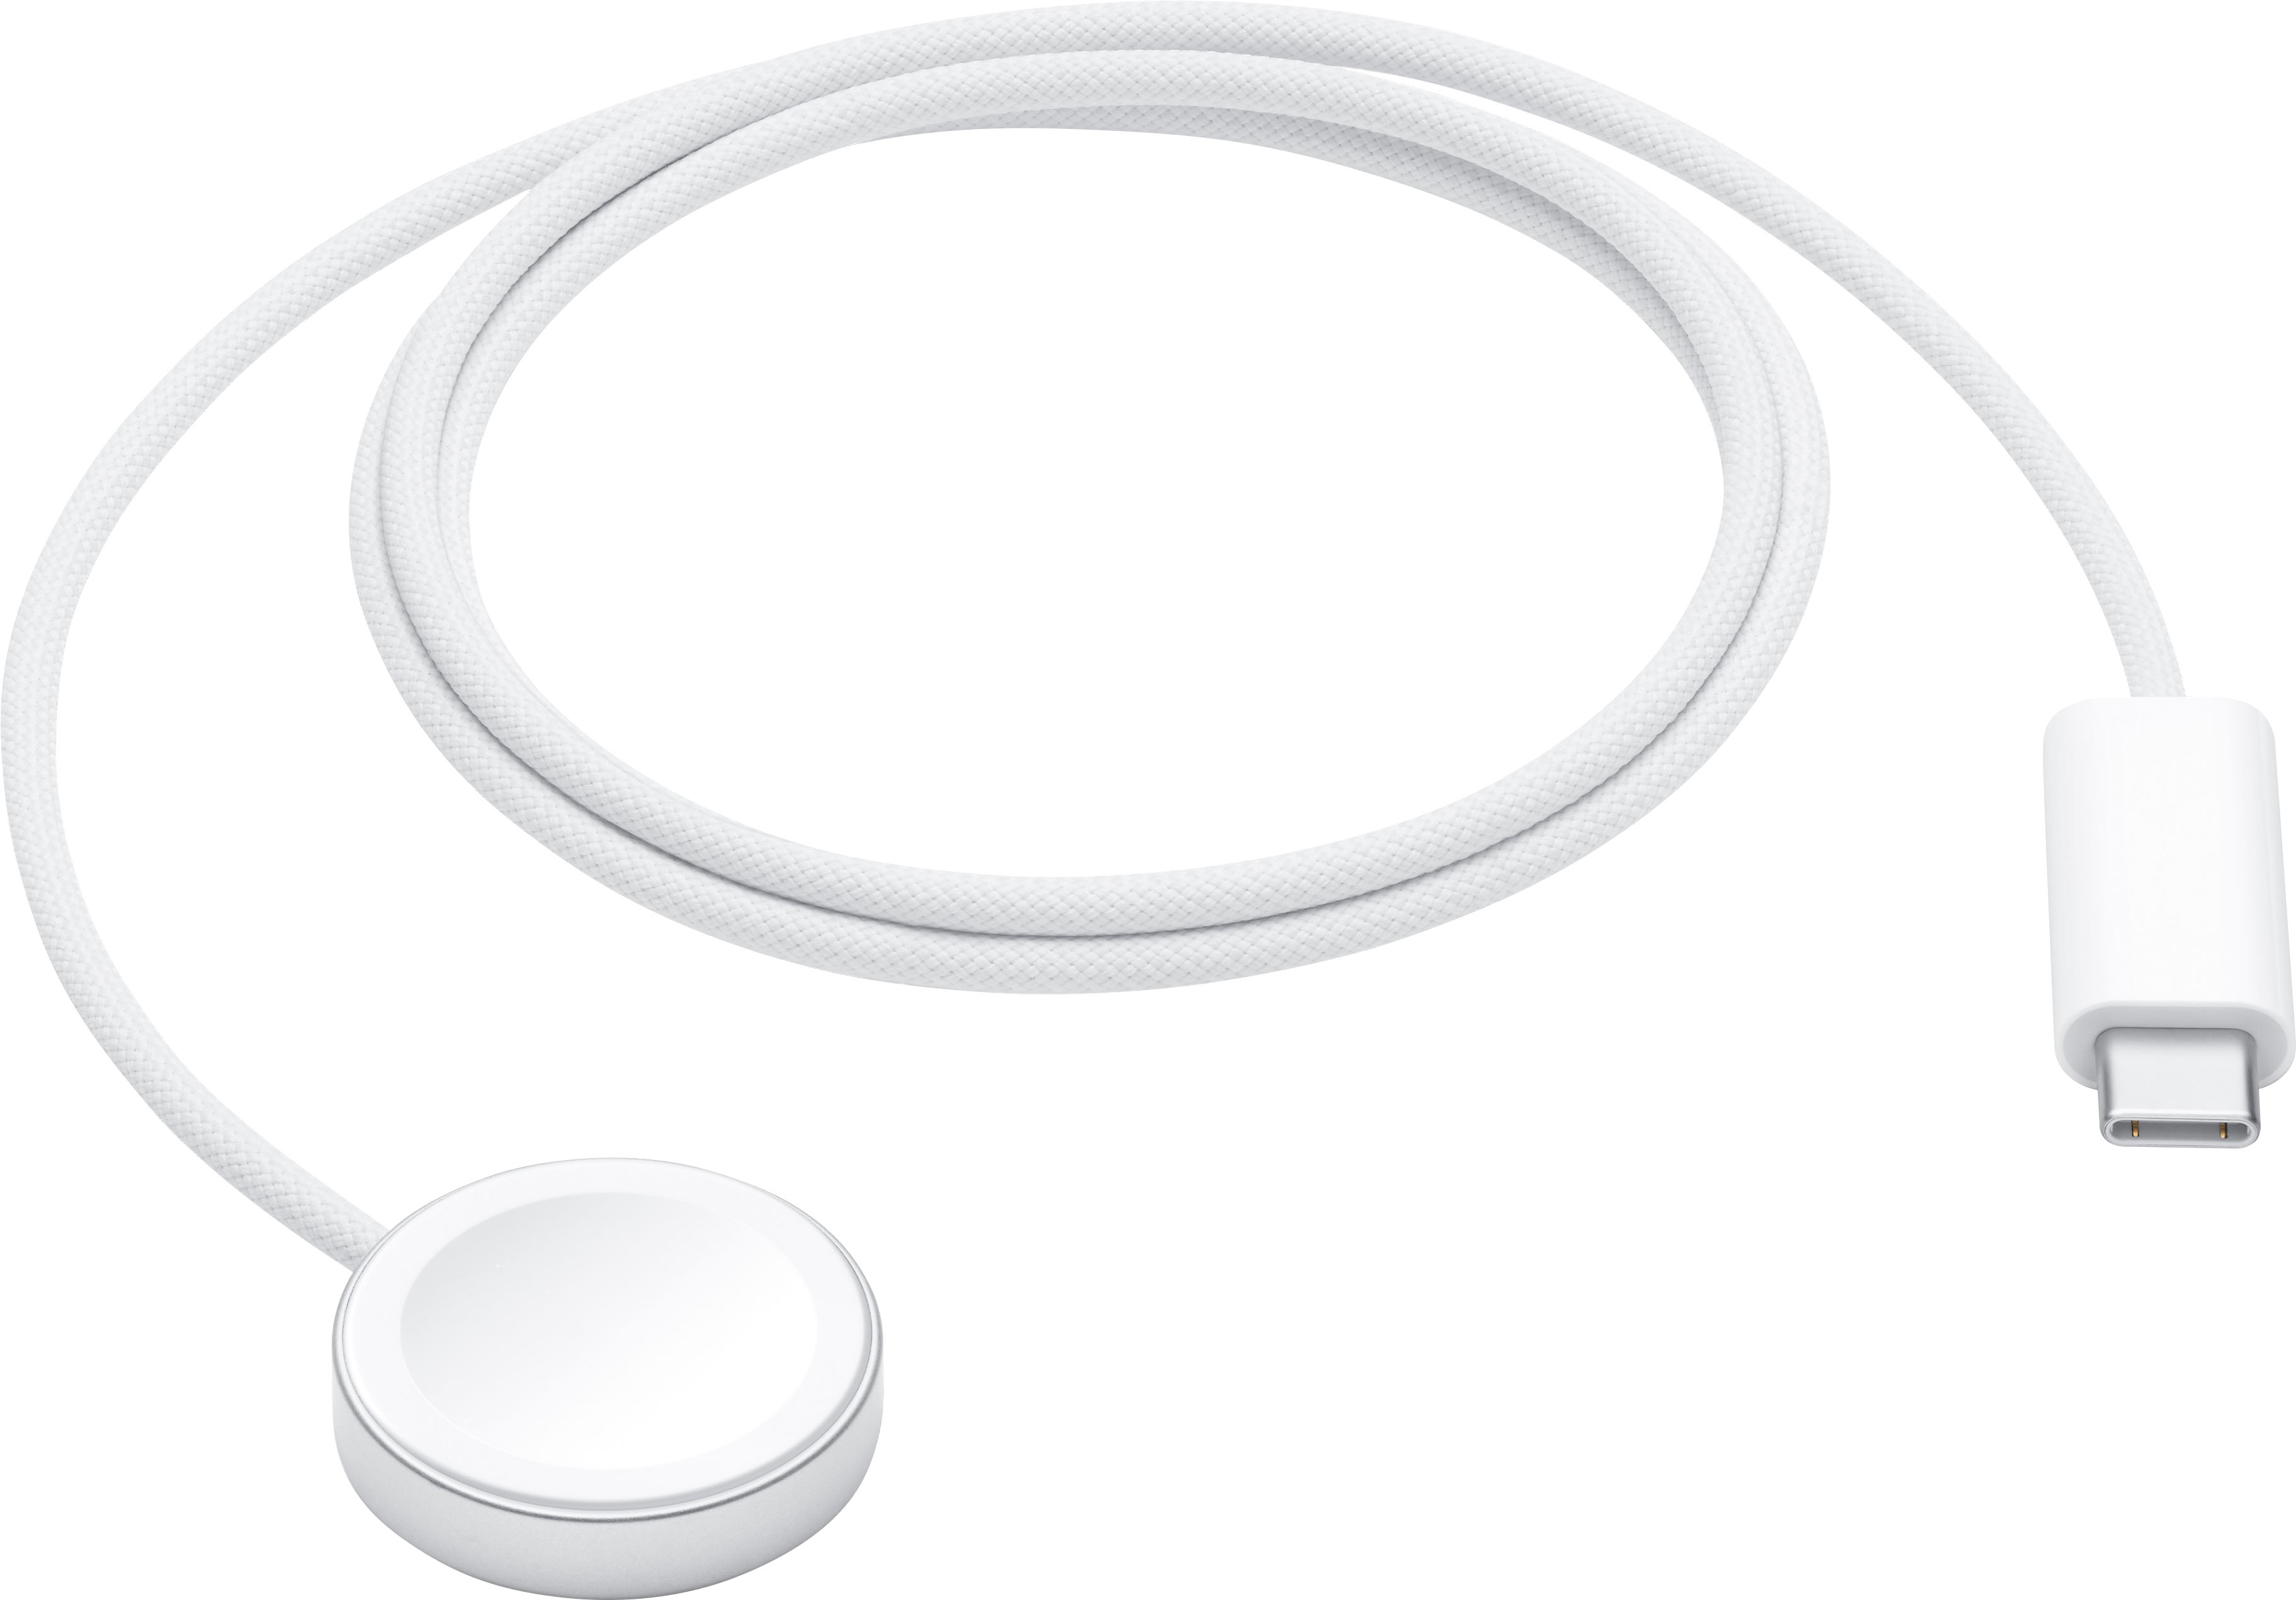 Apple - 6.6' Magnetic Charging Cable for Apple Watch - White